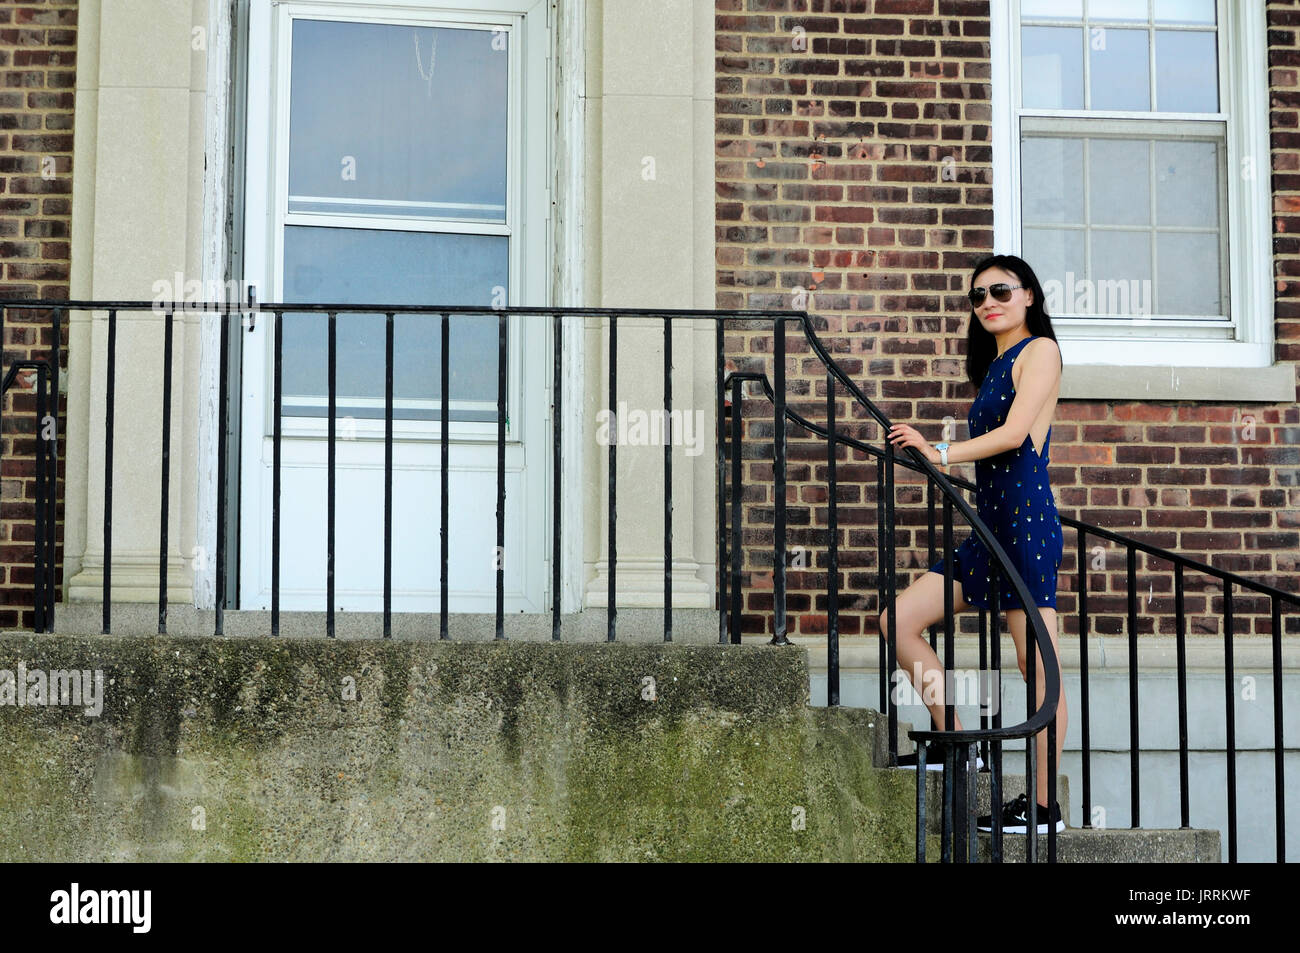 A chinese woman walking up cement steps to the door within a brick building on governors island in New York City, New York. Stock Photo